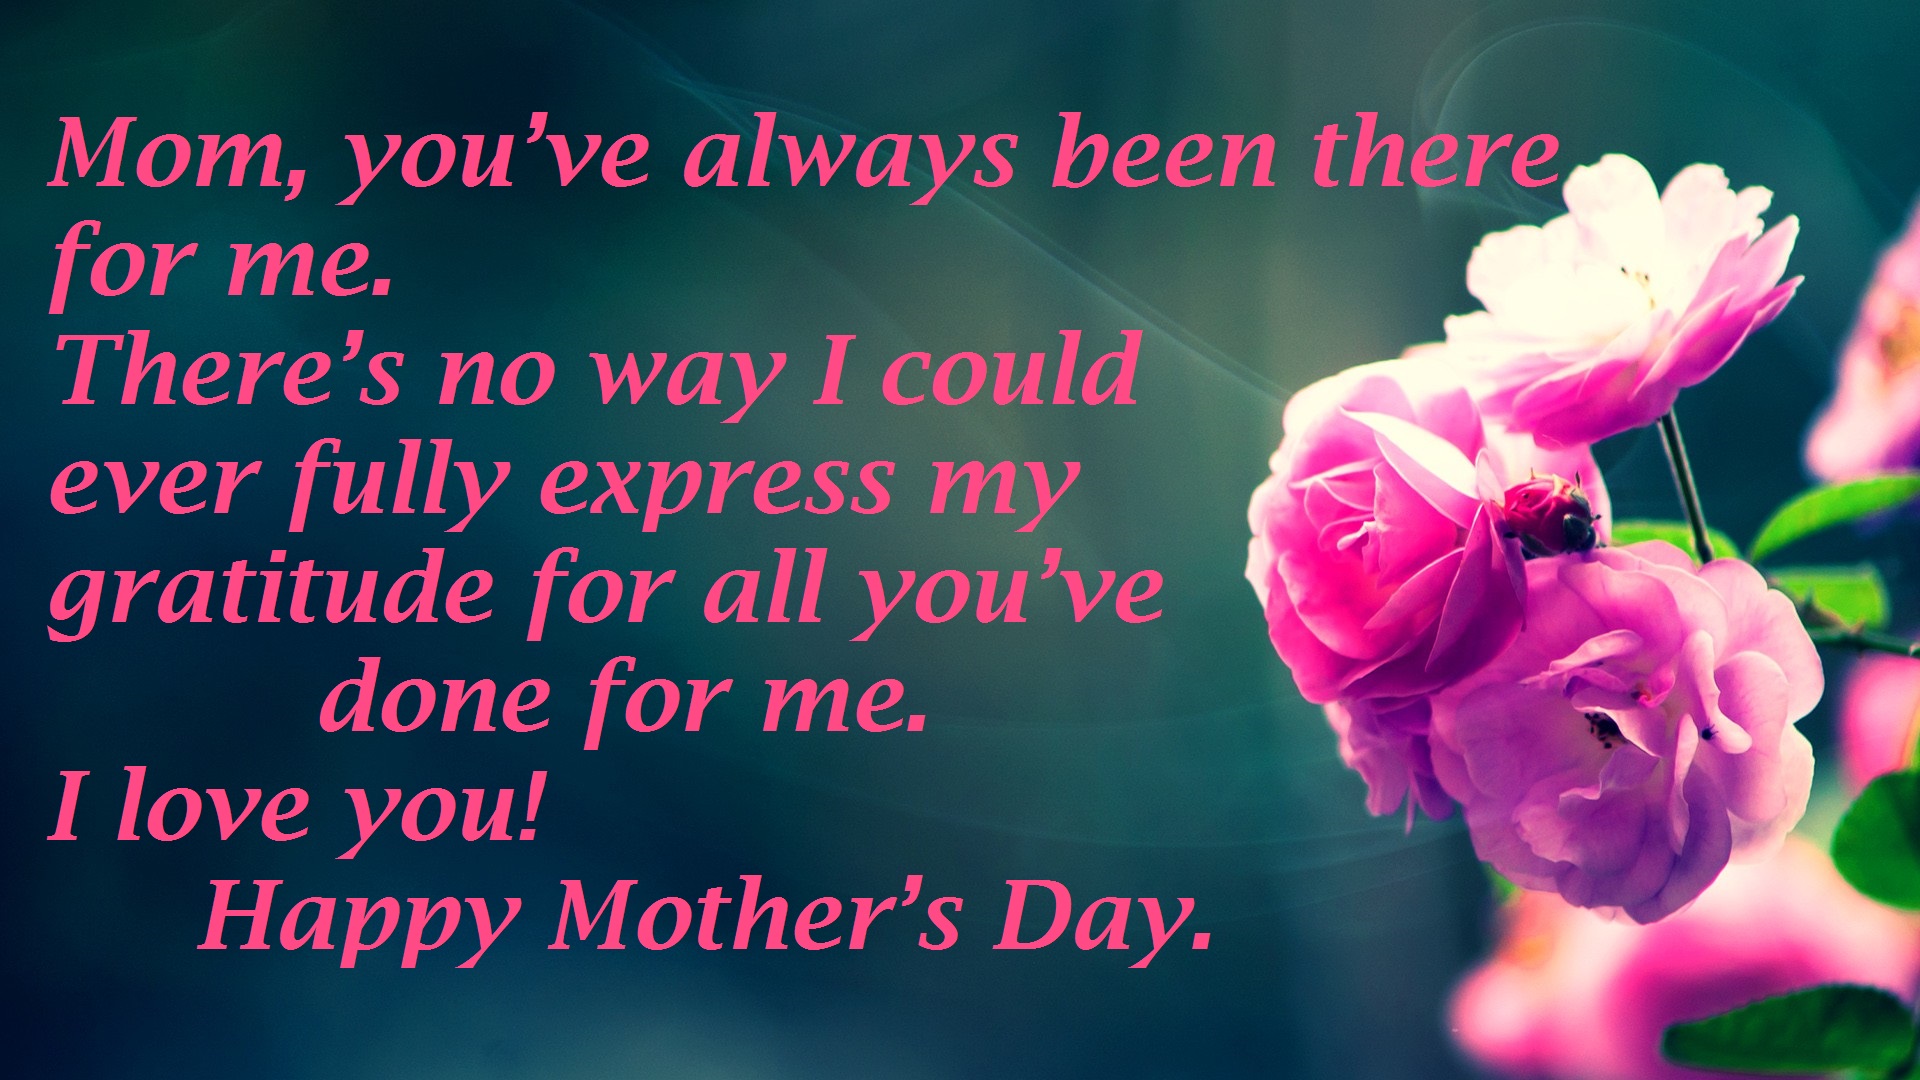 mothers day wishes 2017